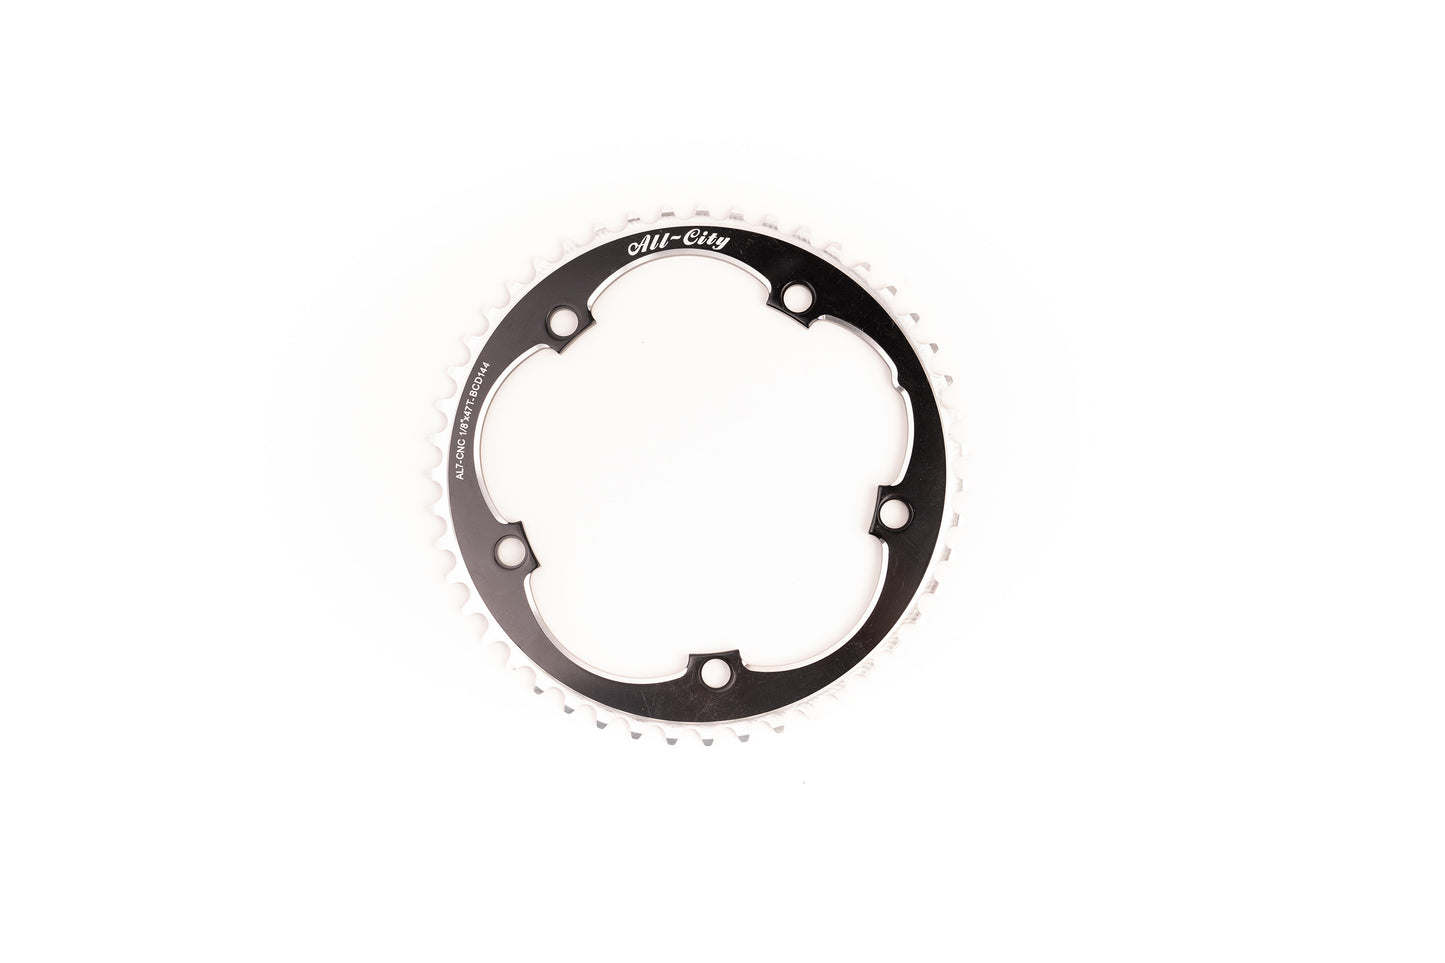 All-City 47T 144 1/8 612 Track Ring Blk